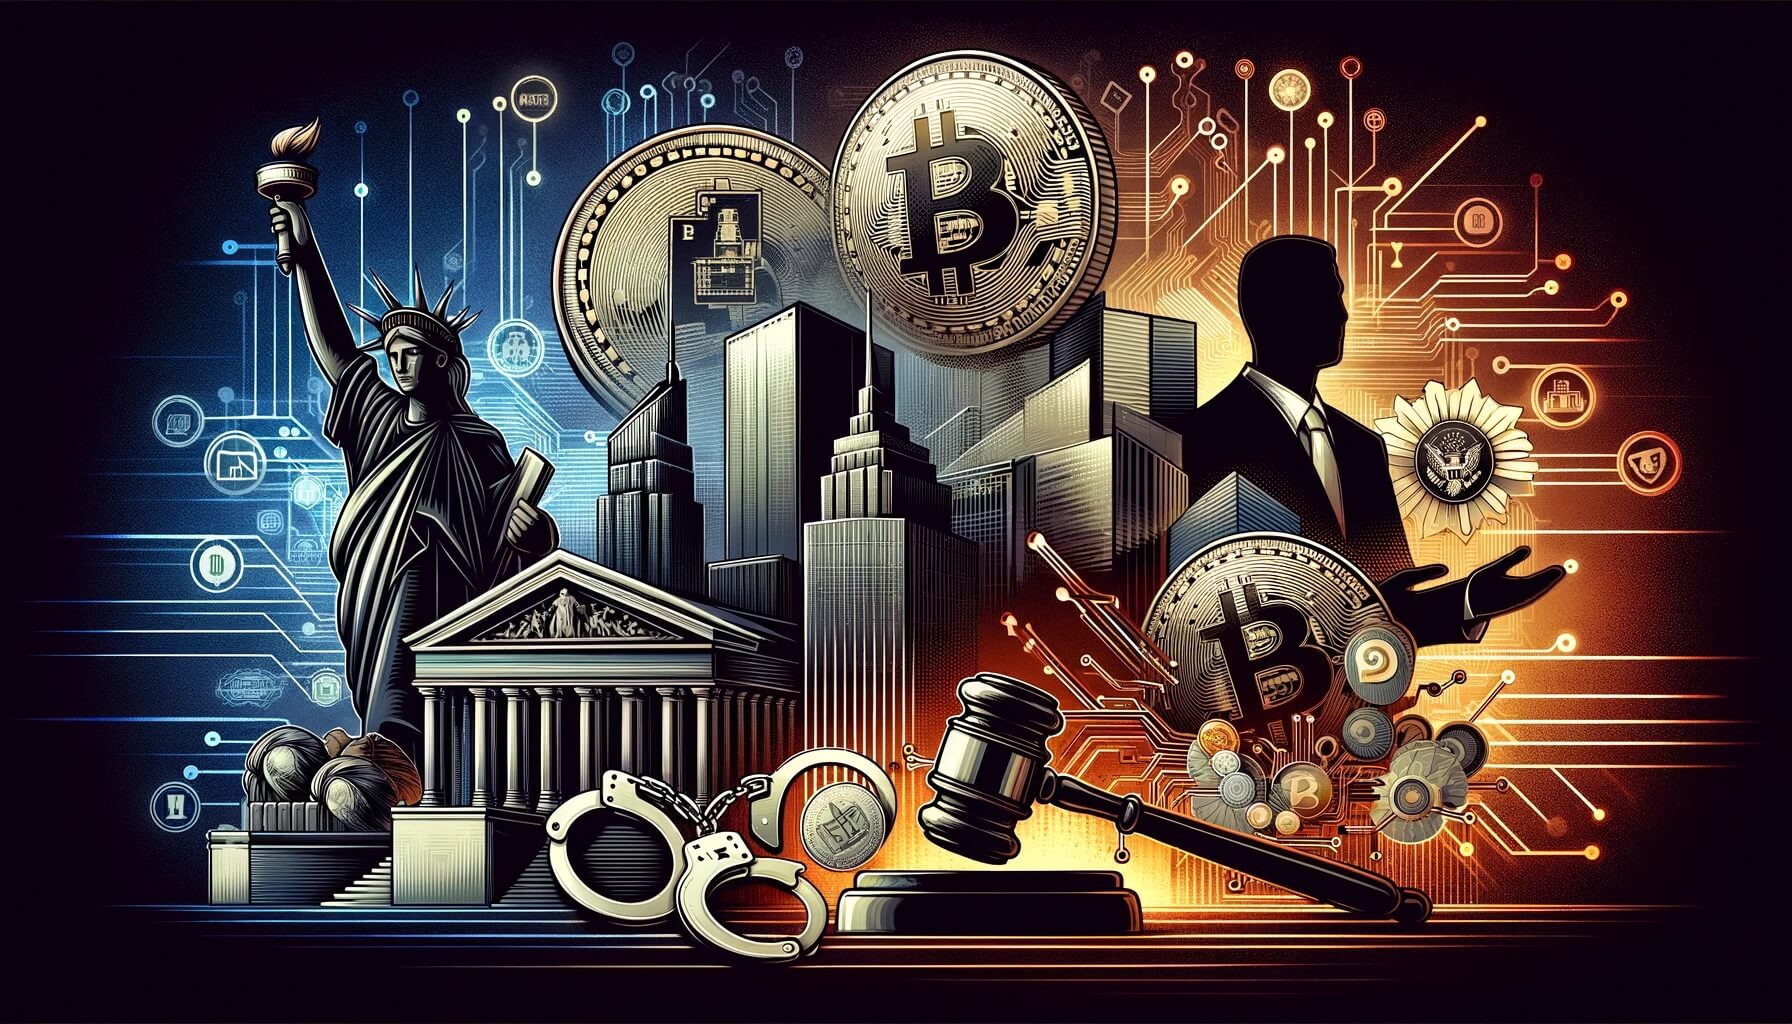 Three arrested in $10M bank fraud, crypto laundering scheme